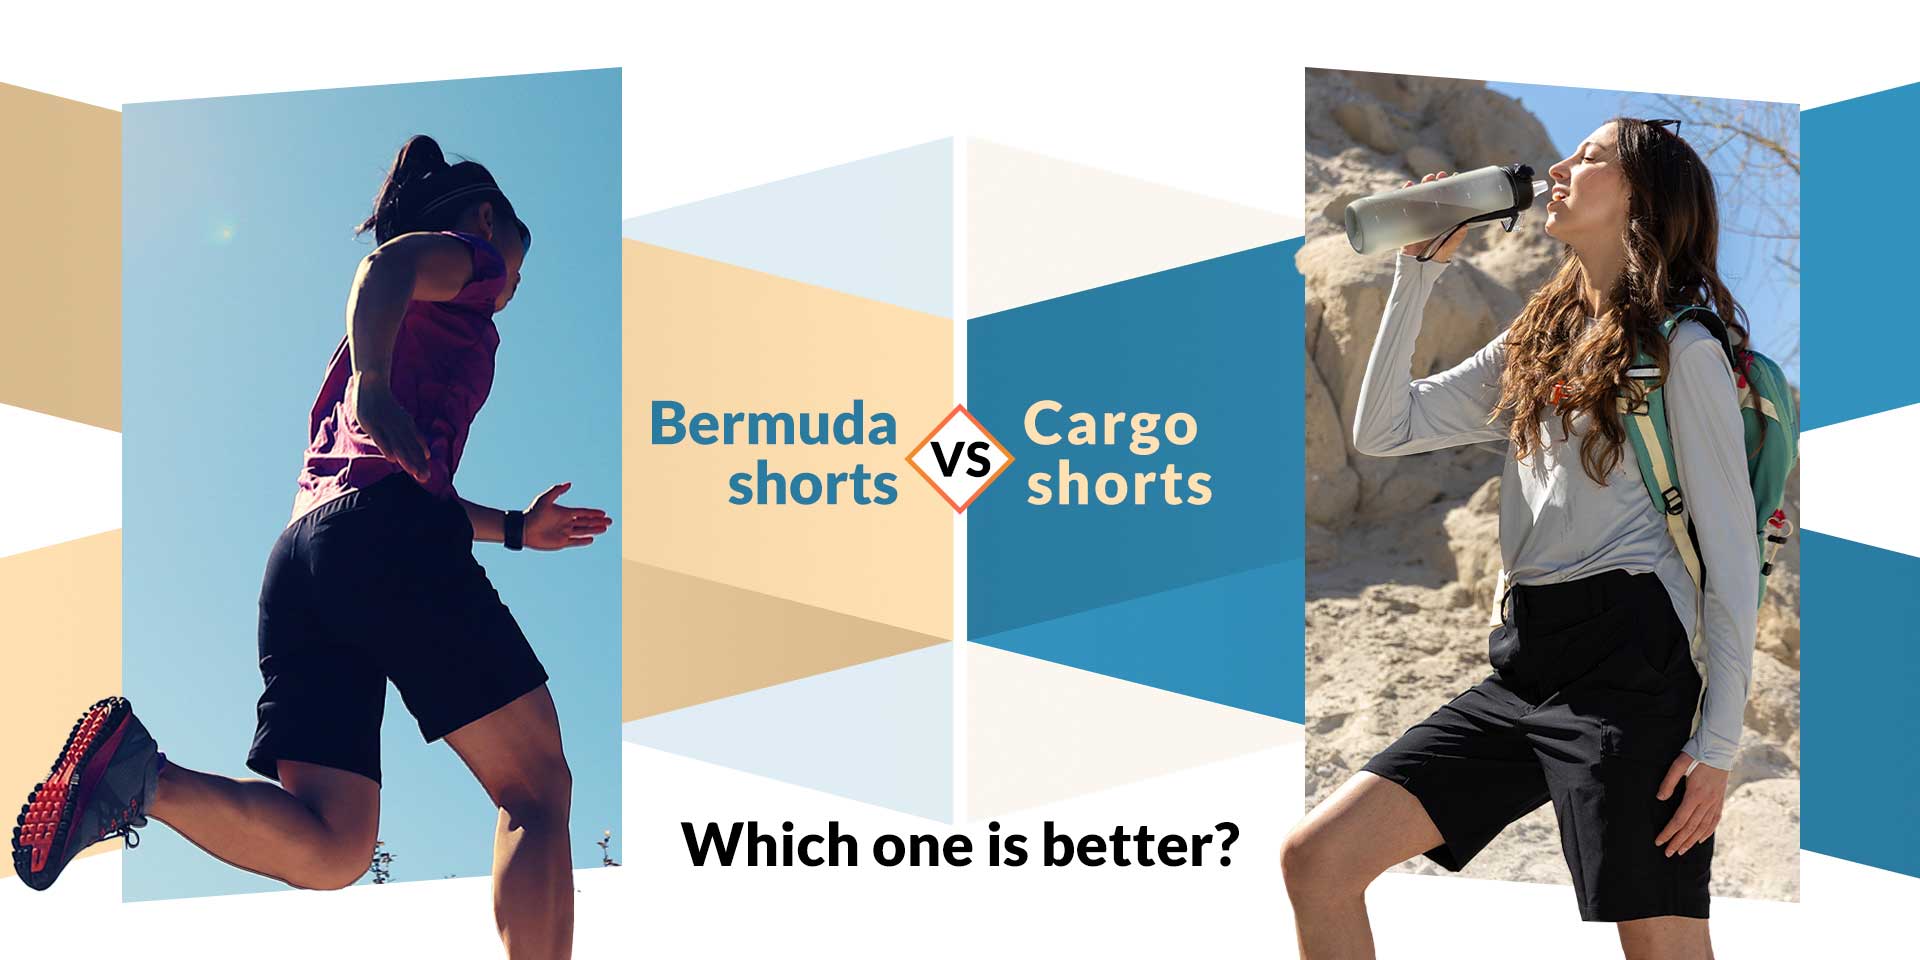 Bermuda shorts vs. cargo shorts: Which one is better?